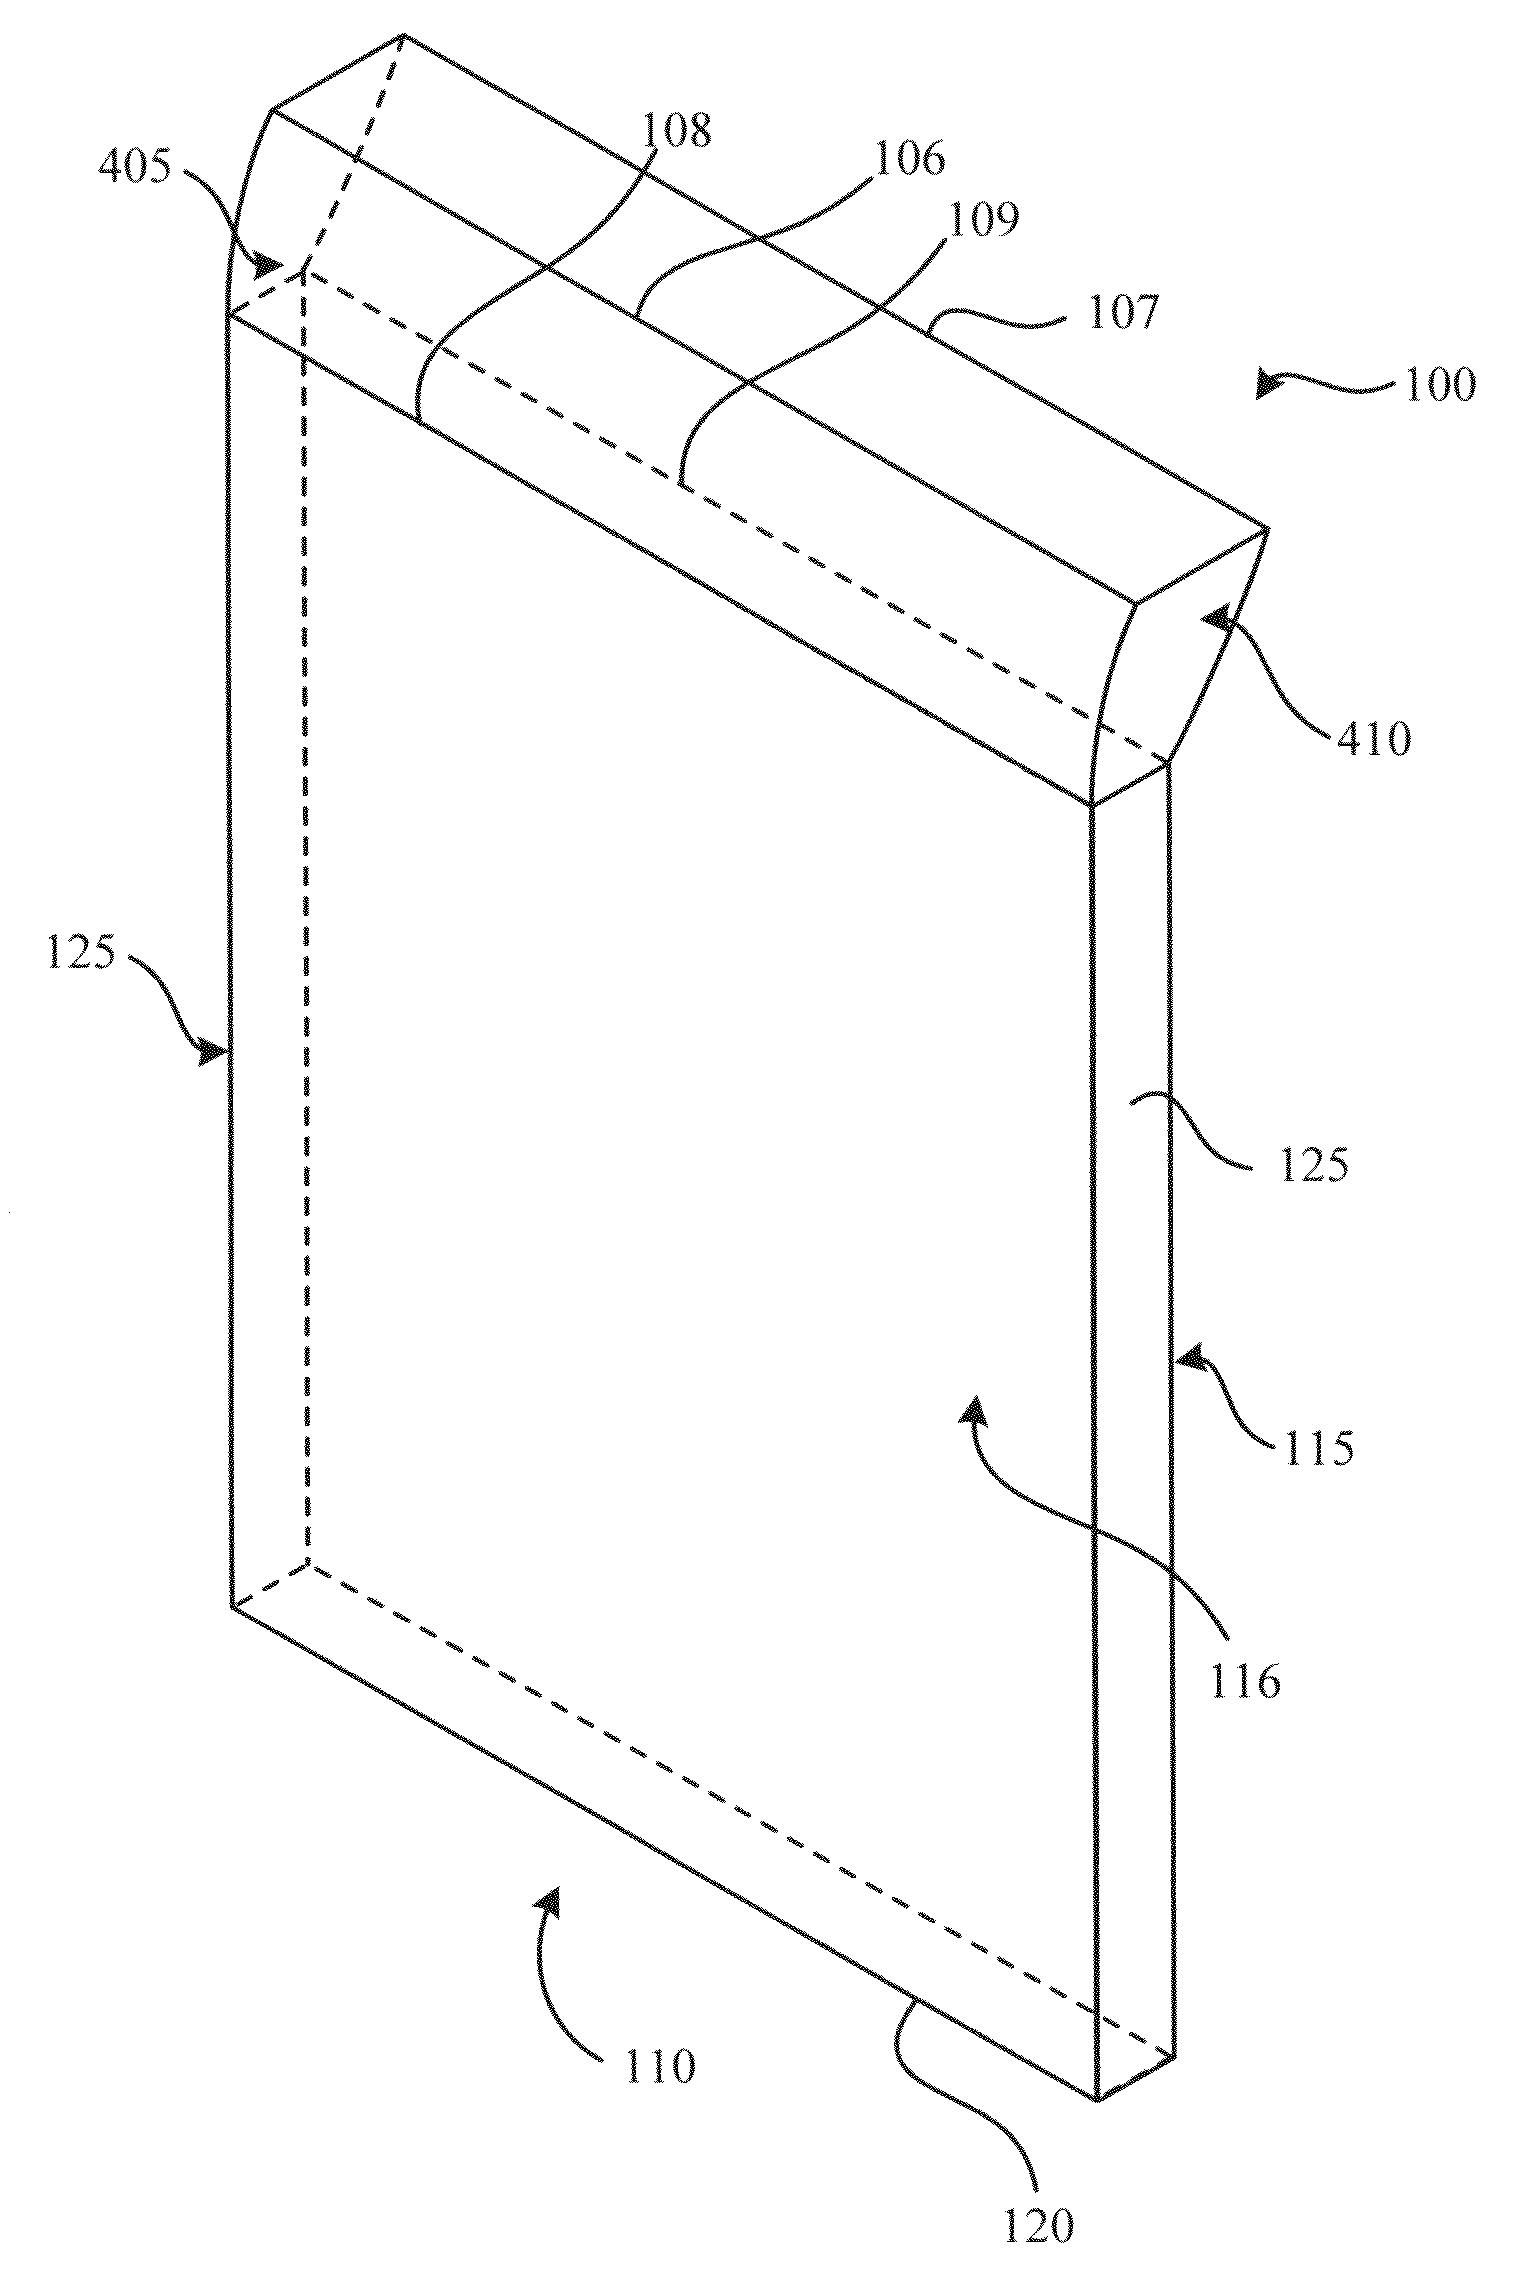 Asymmetric compound parabolic concentrator and related systems